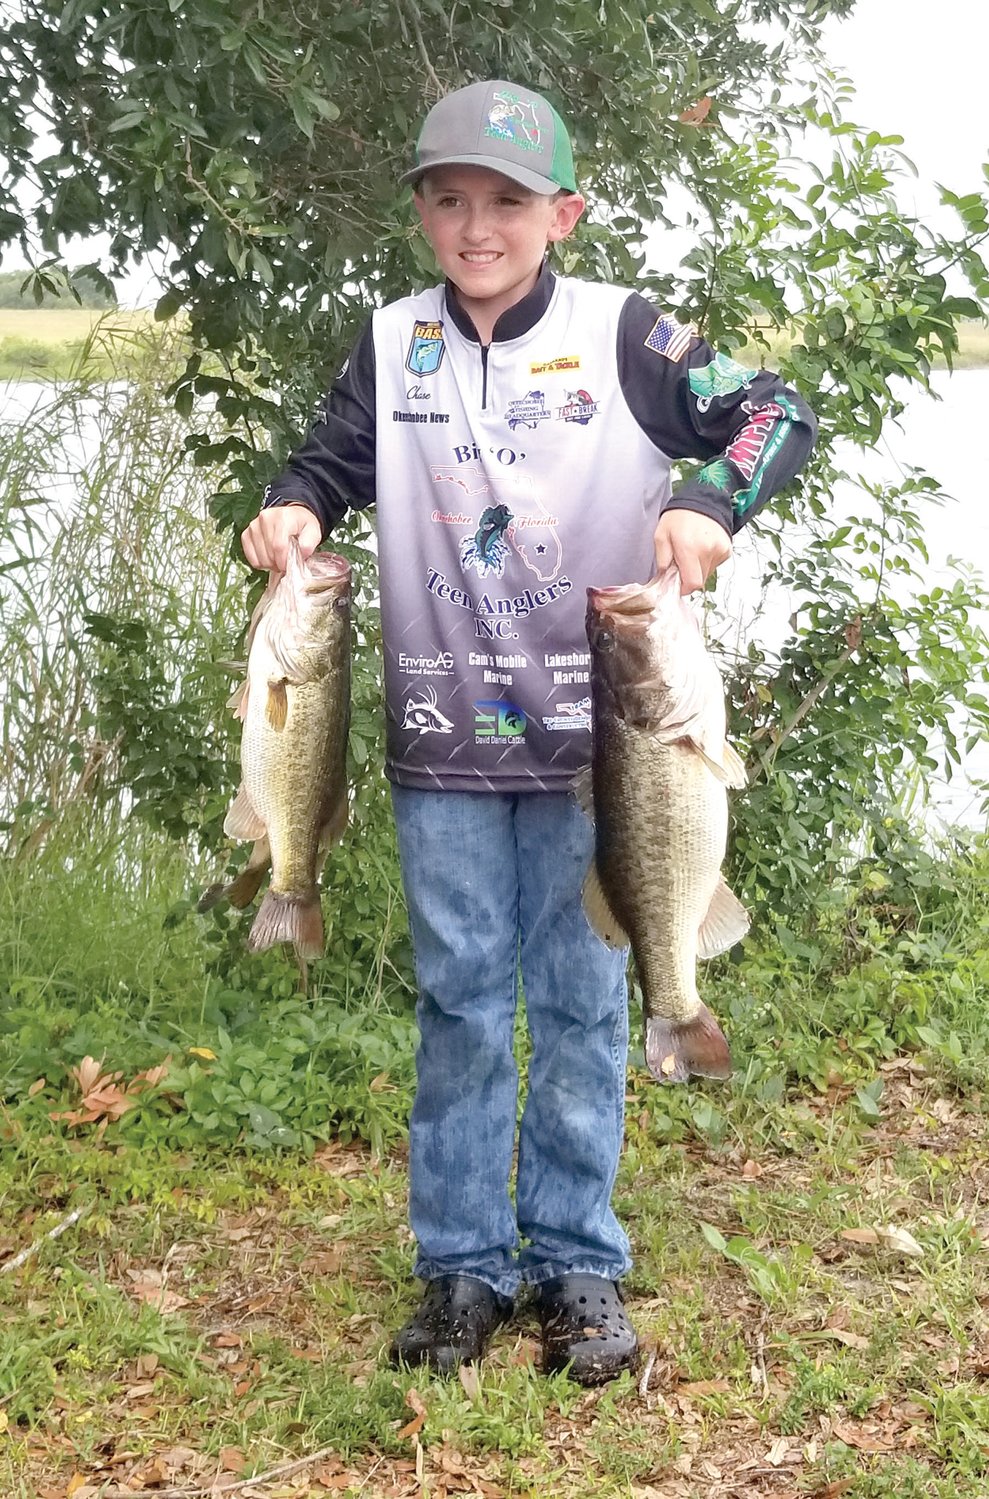 Second place winner Chase Stinson and Big Fish winner in the 1-13 Age Group.